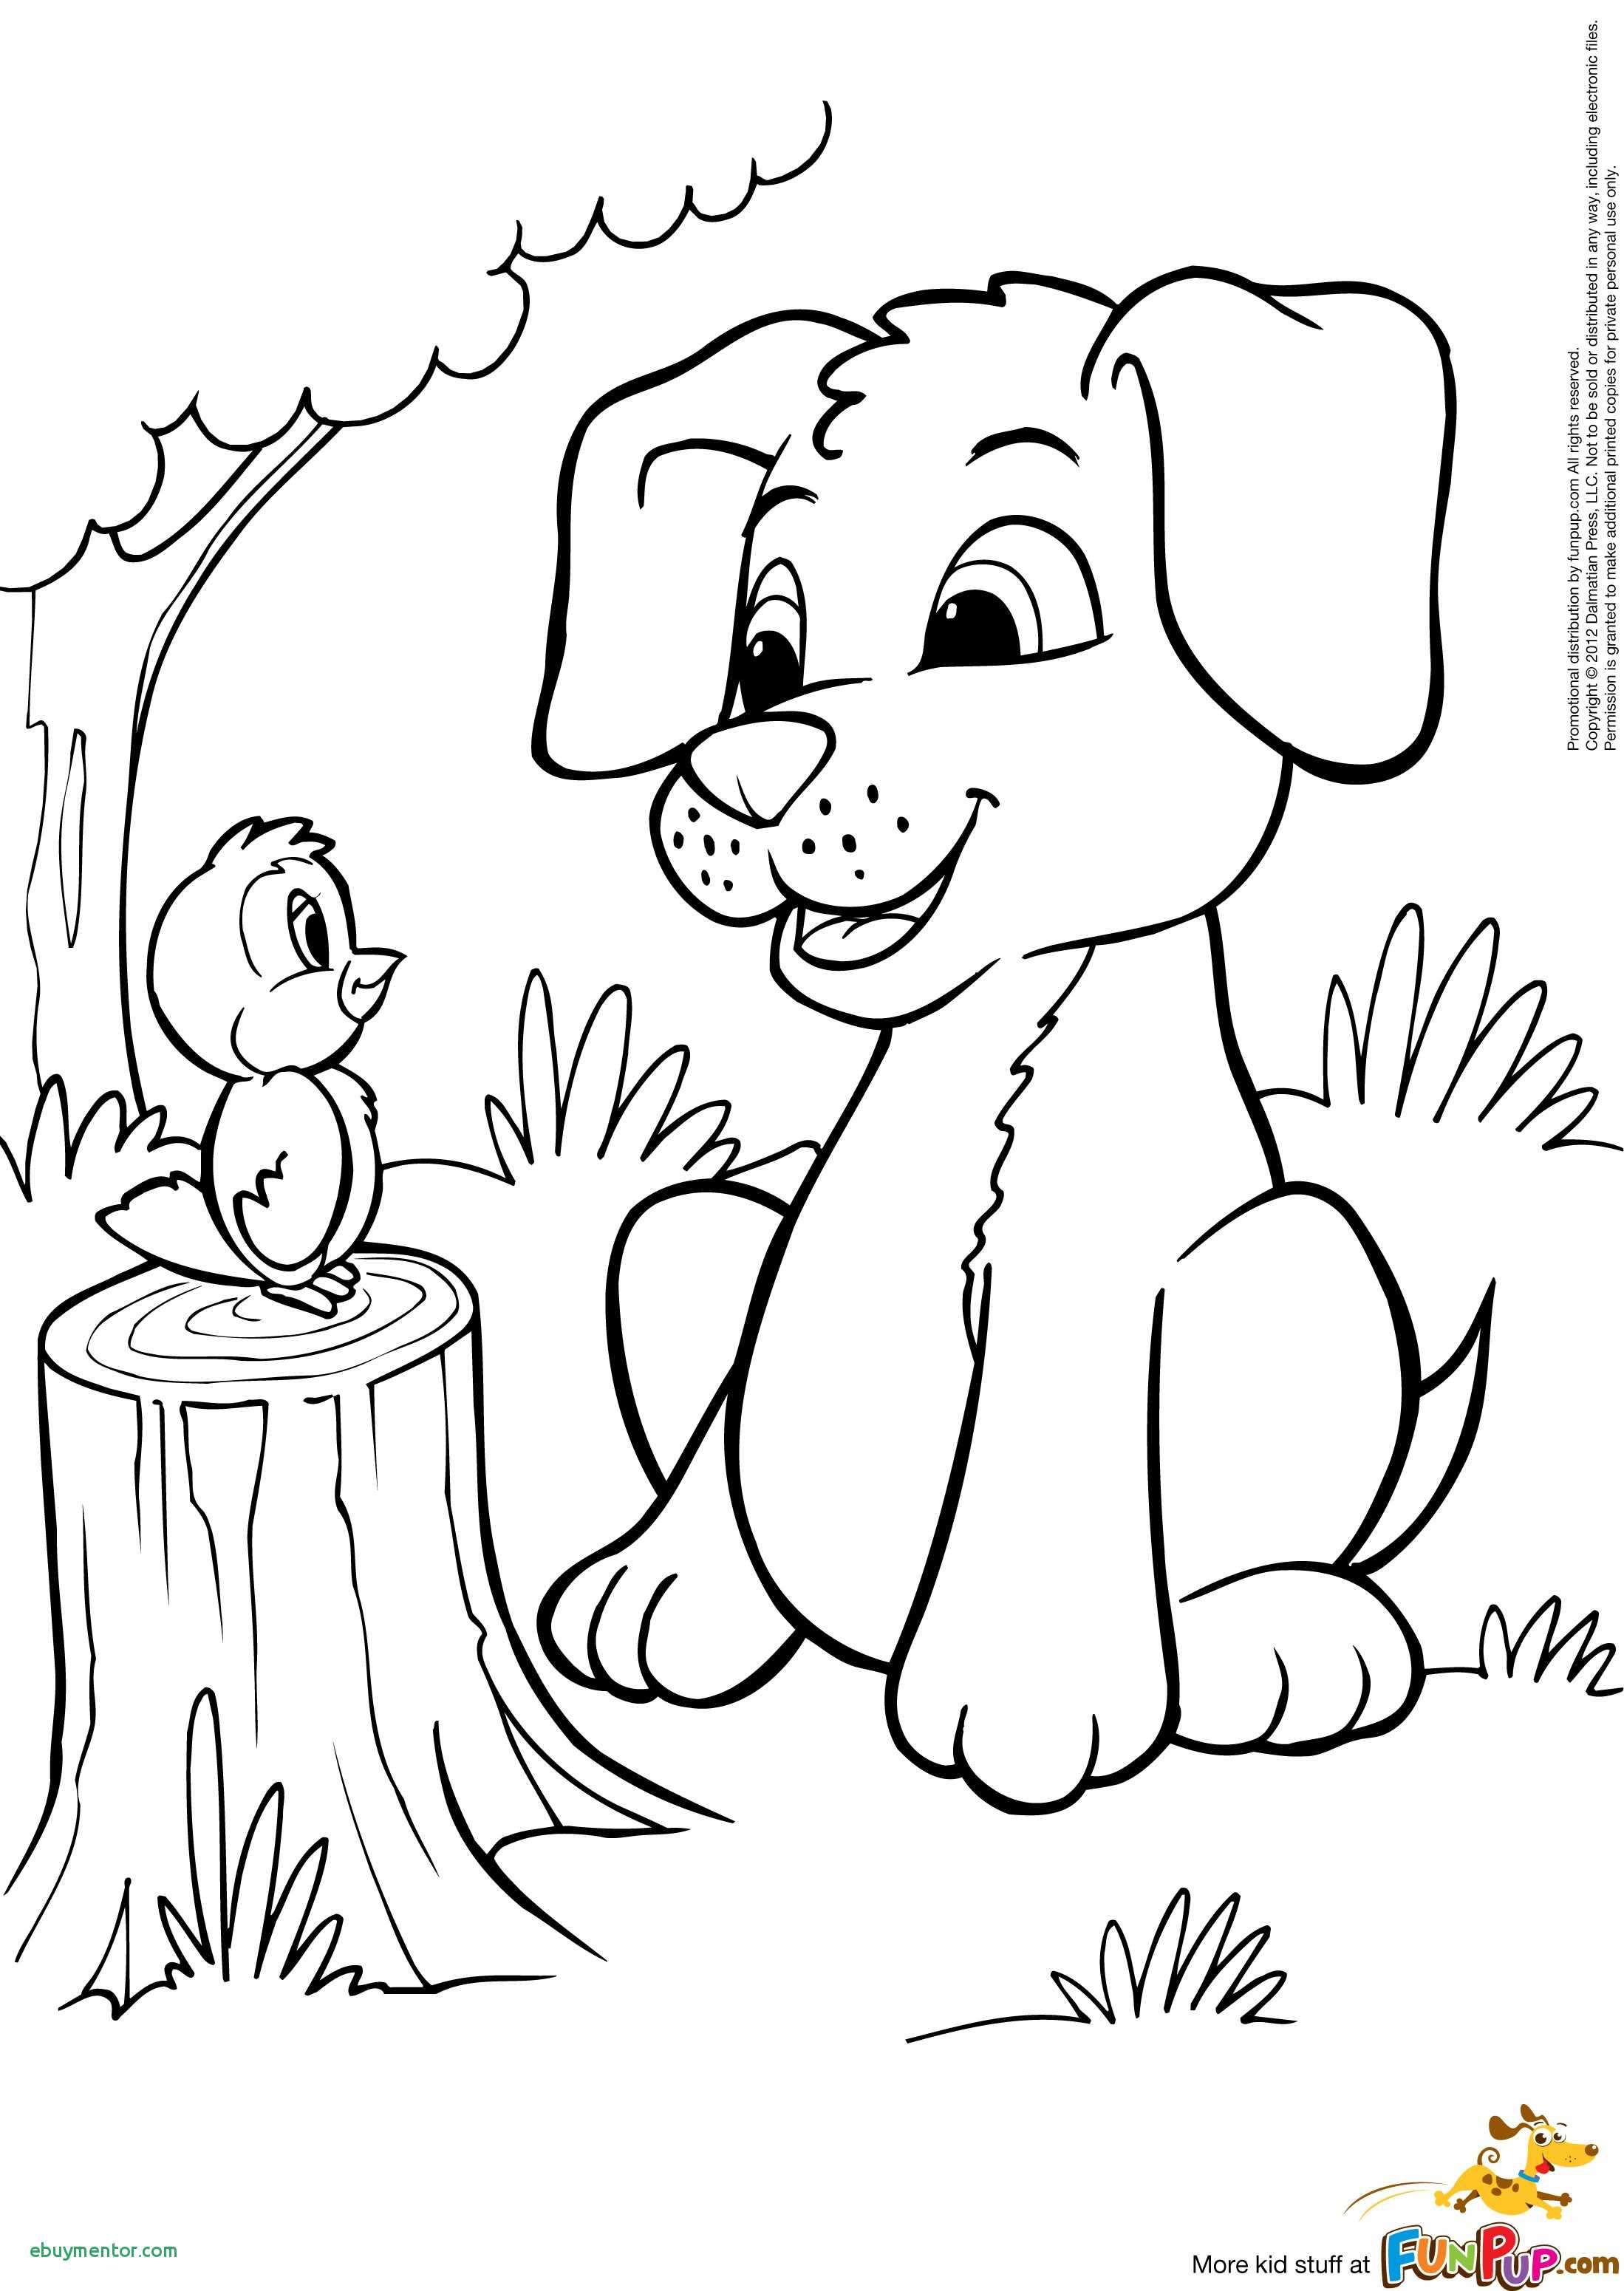 Pictures Of Puppies and Kittens to Color